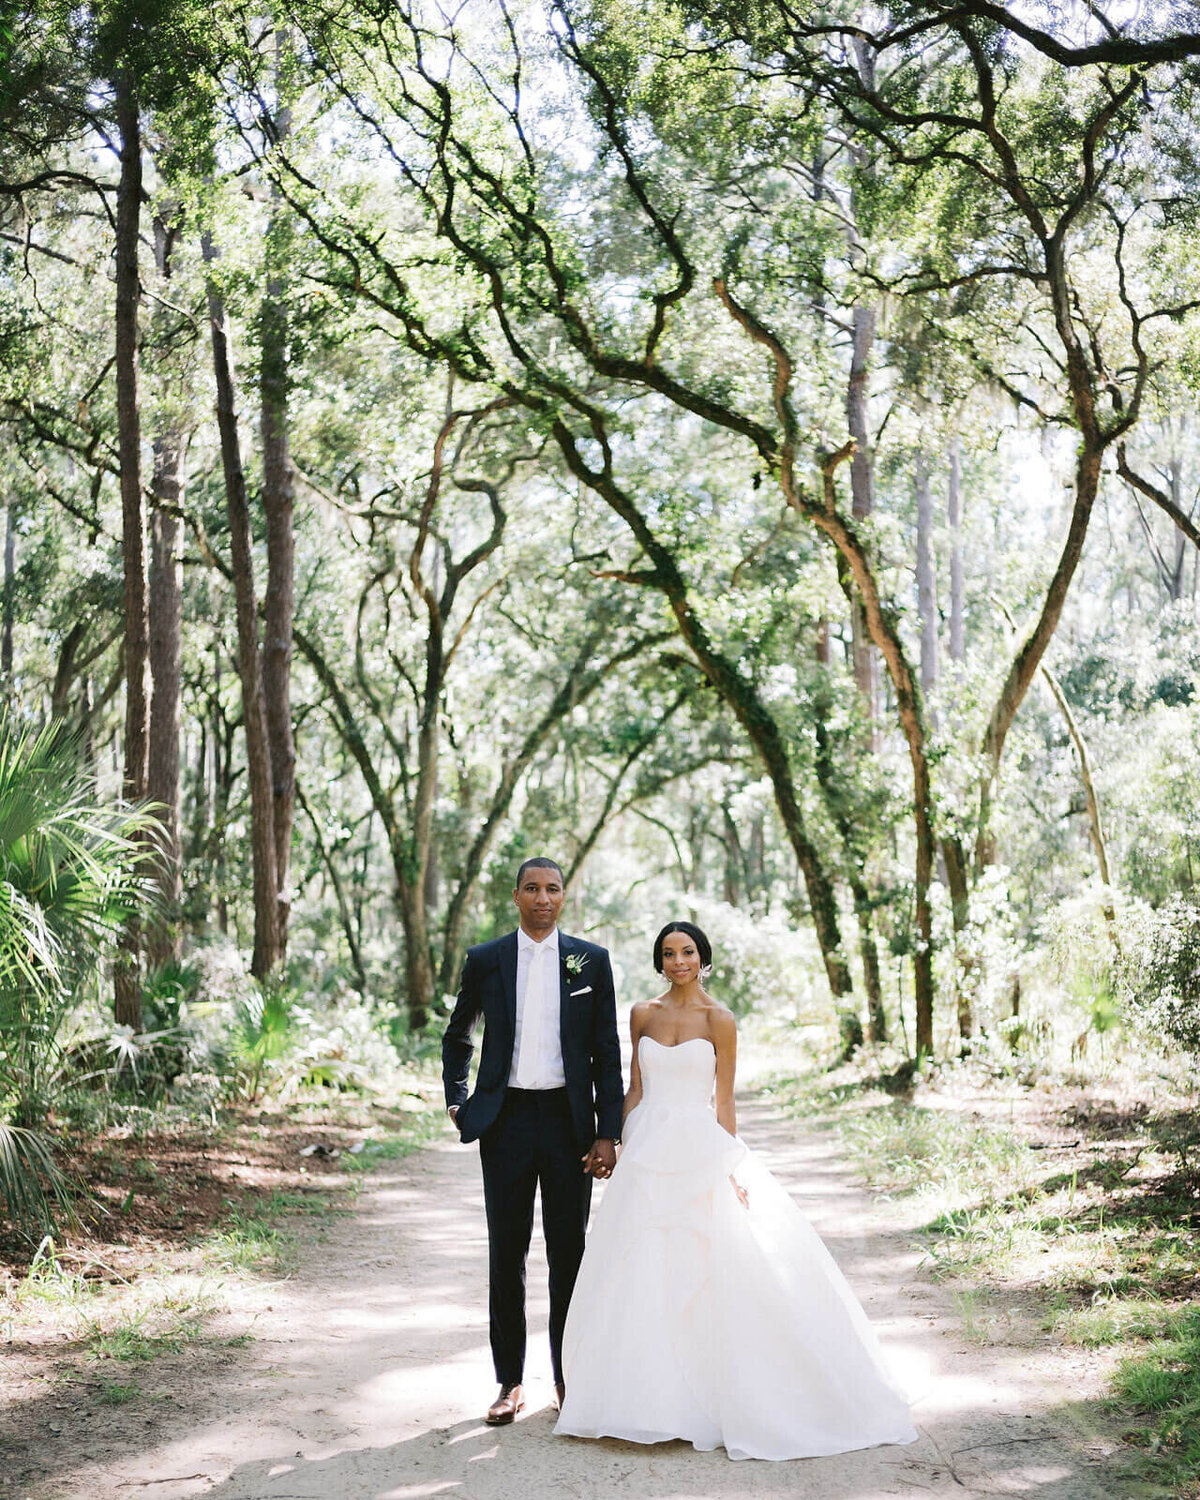 The bride and groom are standing holding hands amongst the trees in Montage at Palmetto Bluff. Destination wedding image by Jenny Fu Studio